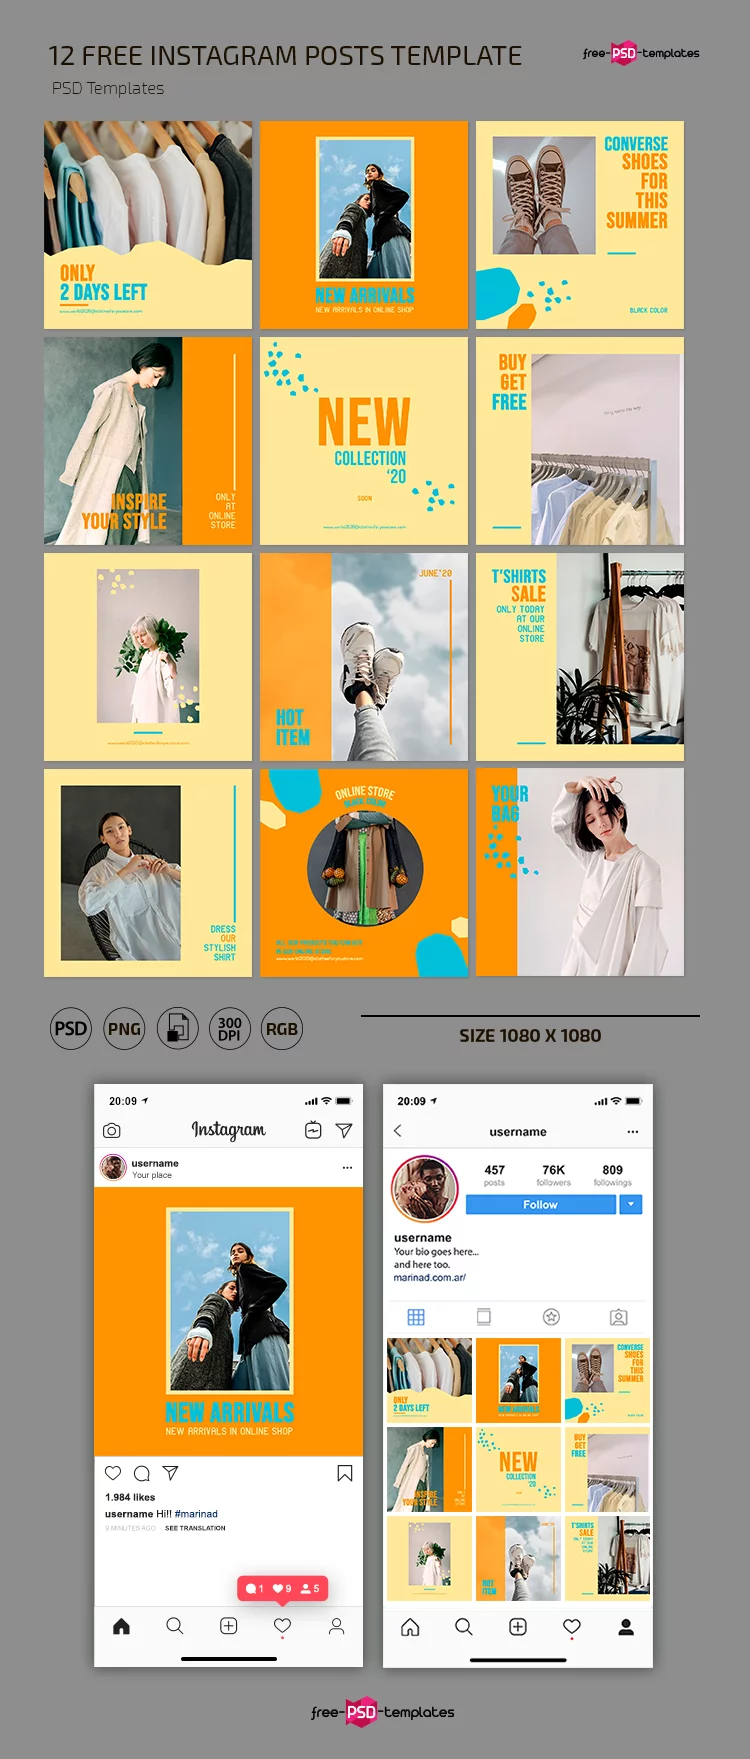 Free Clothes Shop Instagram Posts Template in PSD